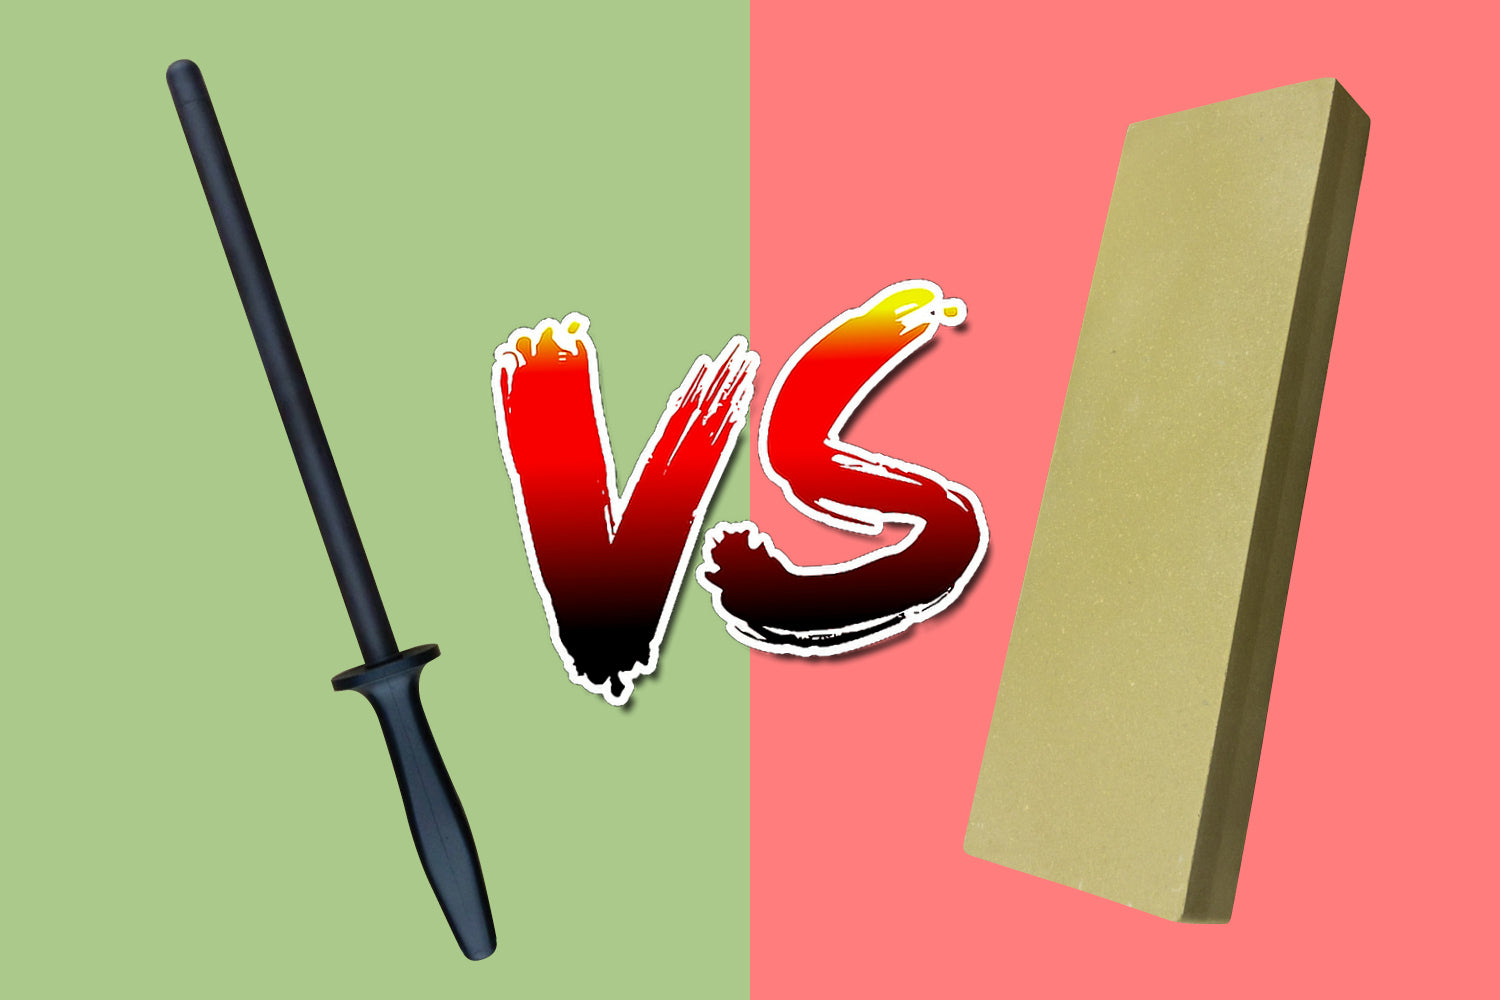 Honing vs Sharpening: What's the Difference?